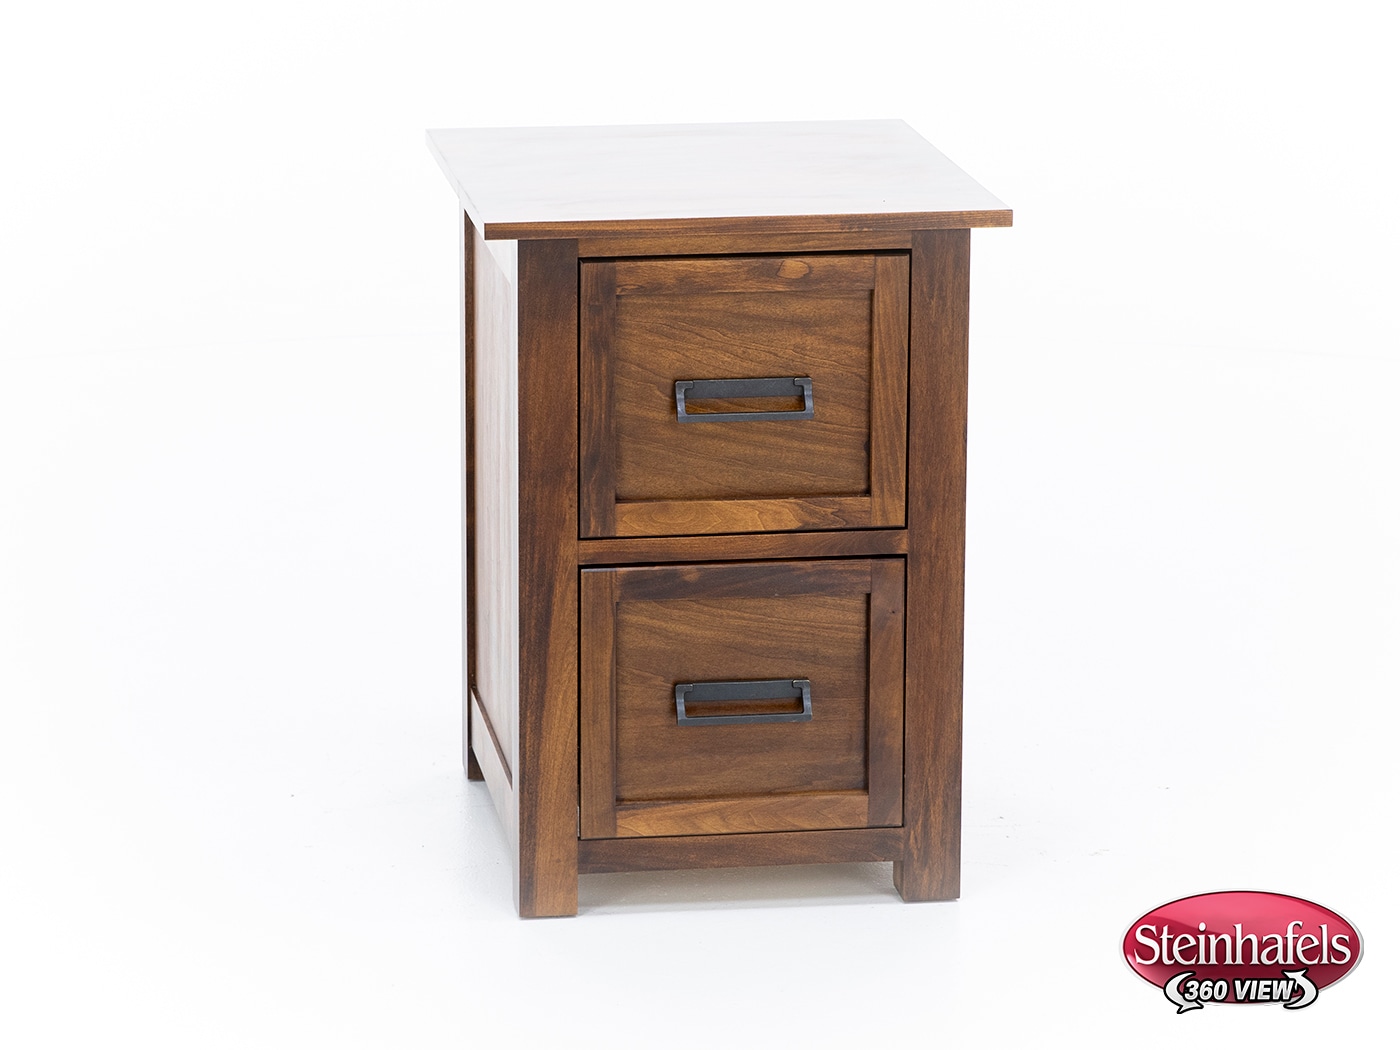 witmer furniture brown filing cabinet  image tylr  